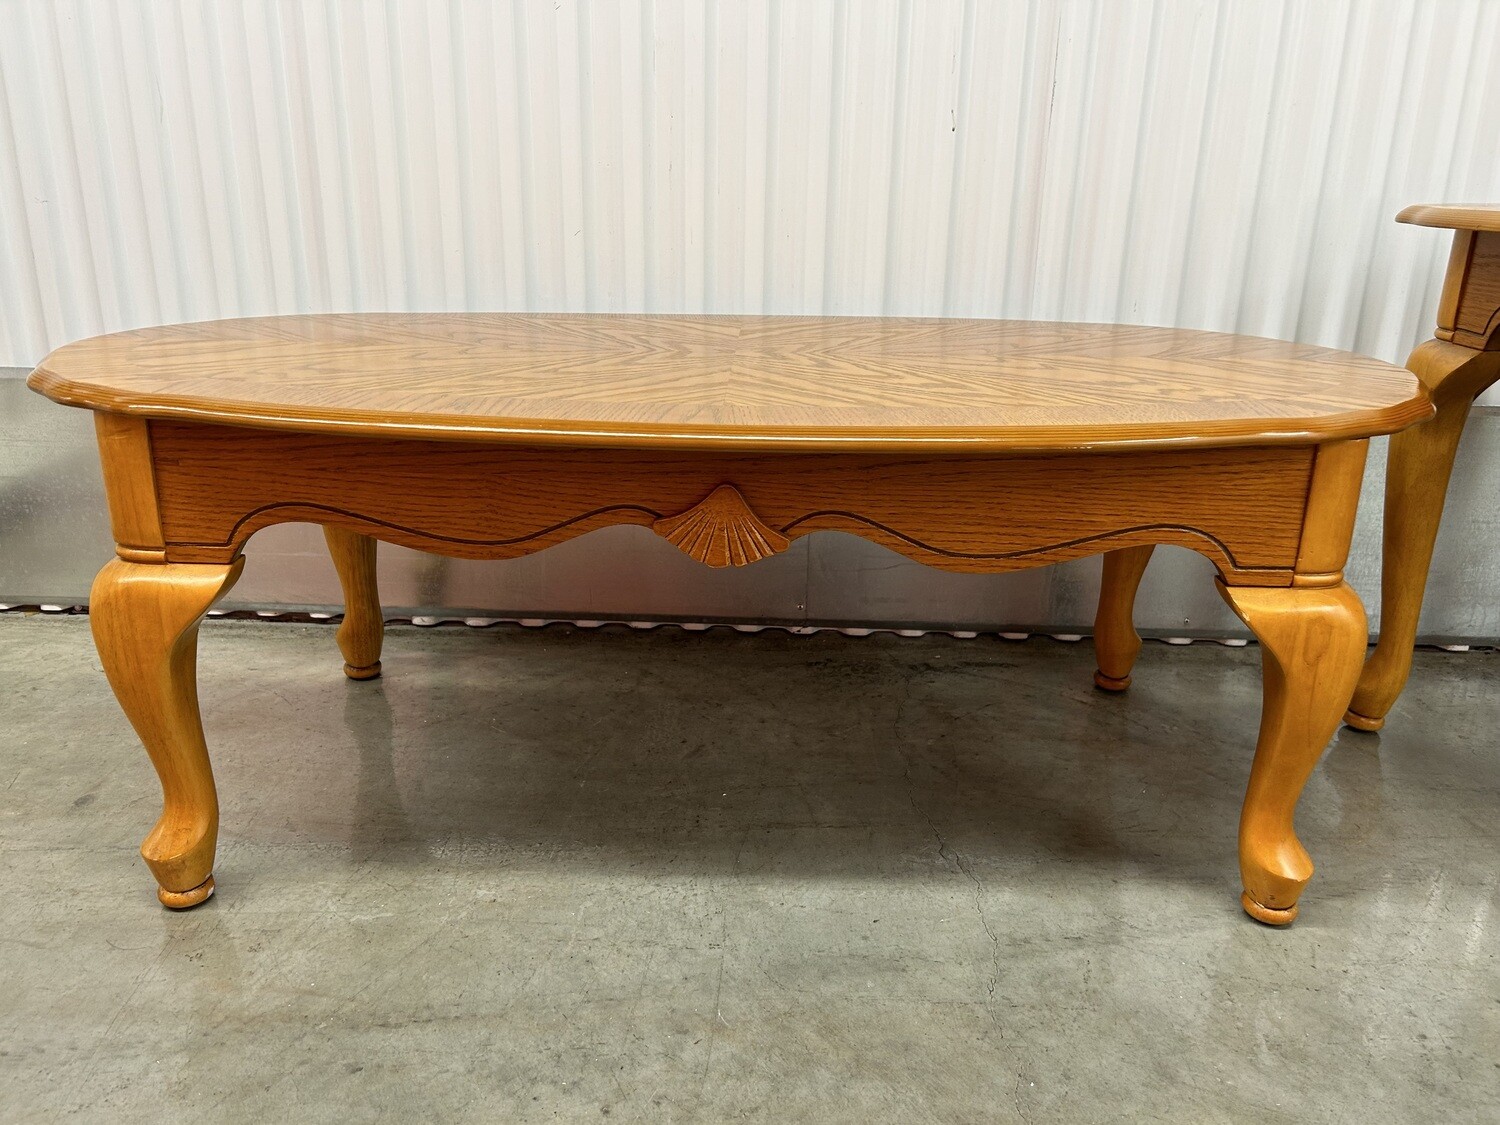 Oak scalloped Coffee Table #2324 ** 6 wks to sell, full price